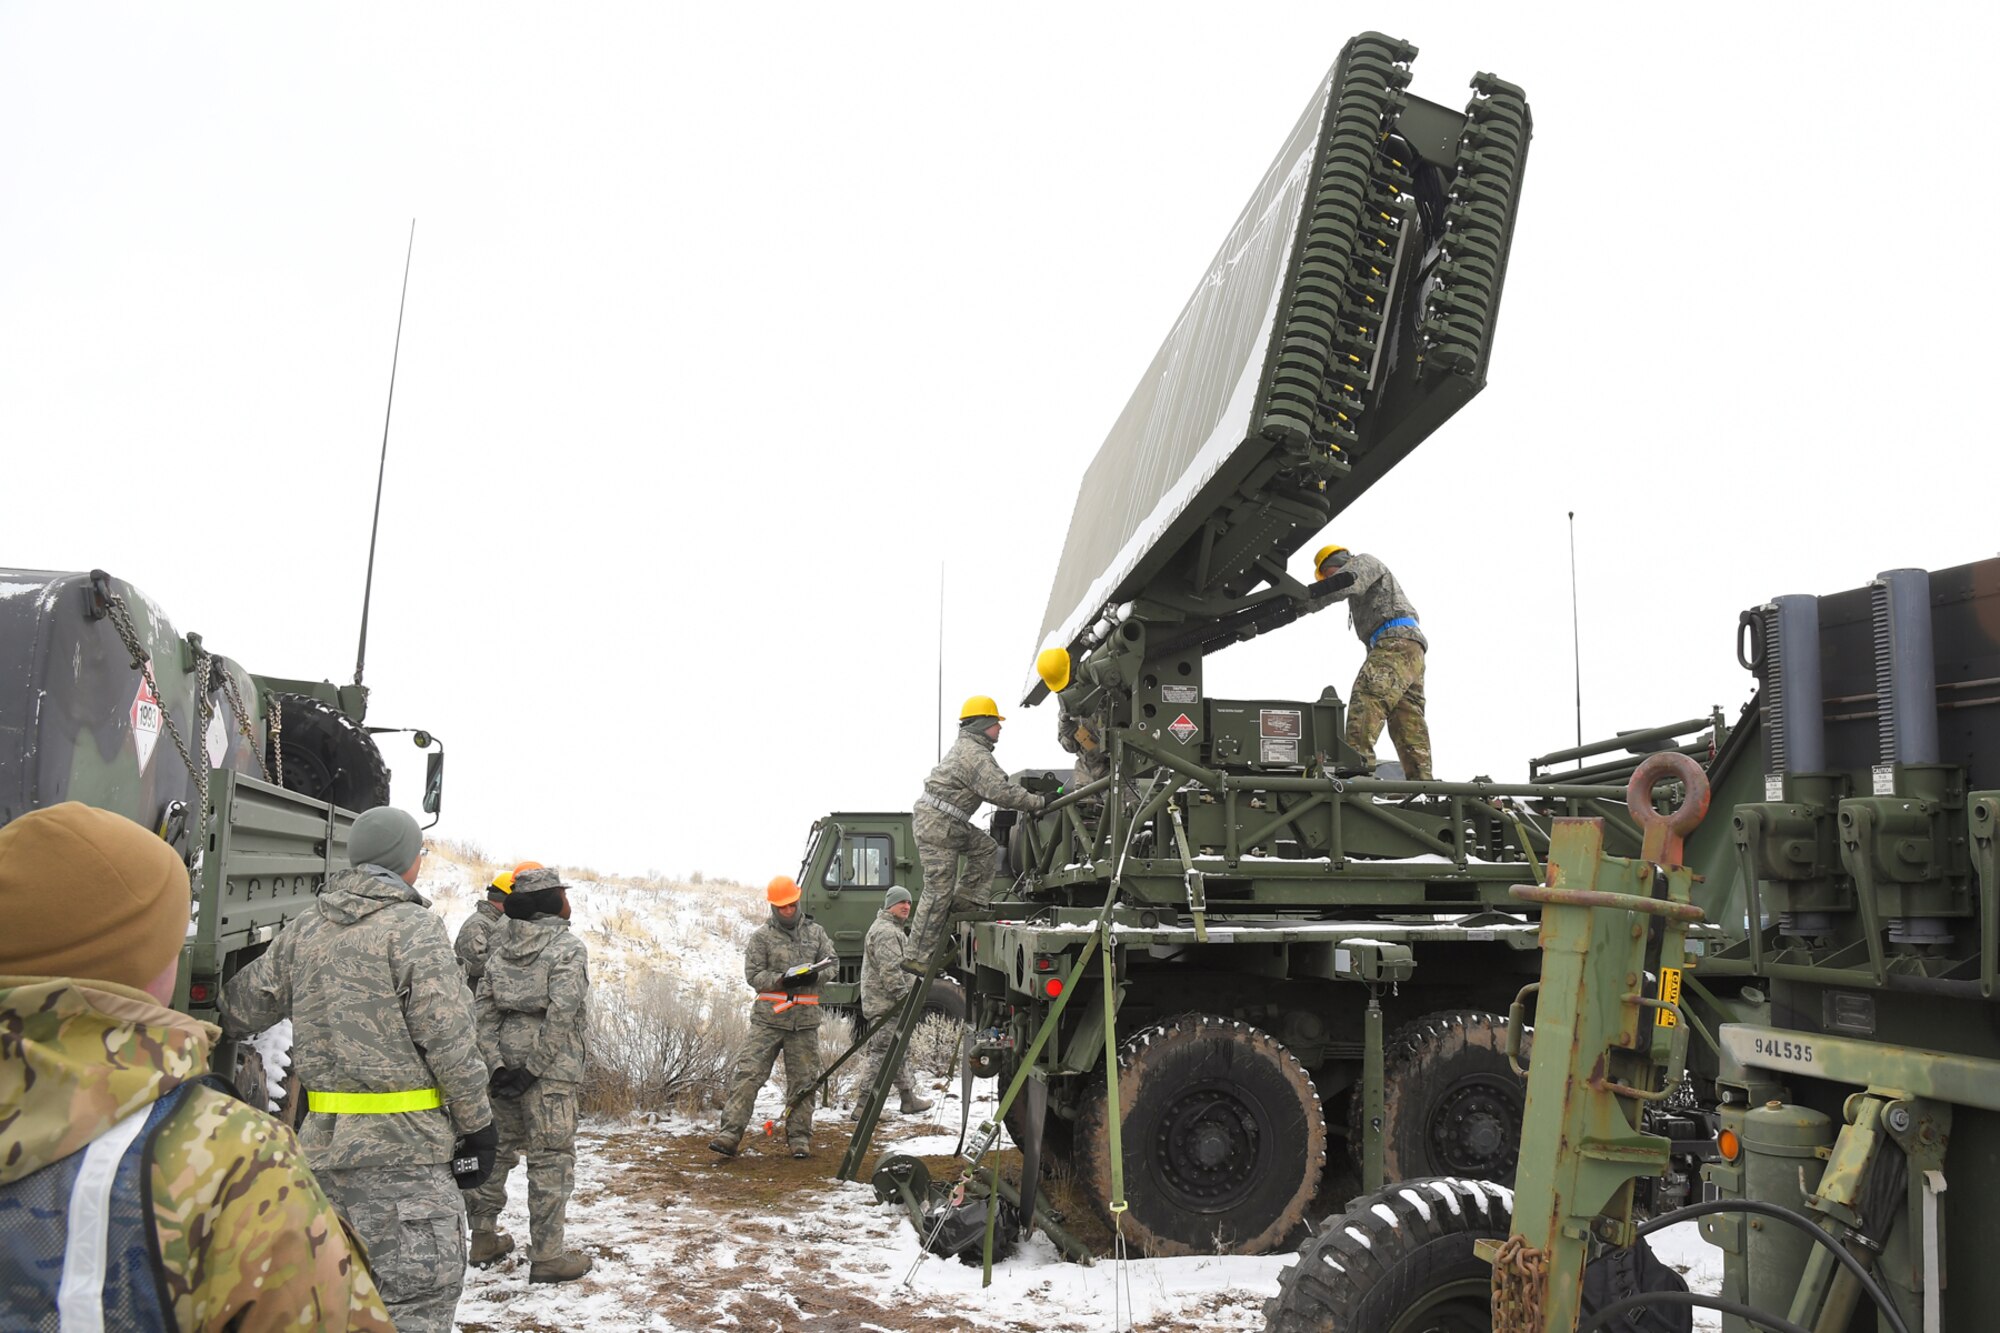 Airmen with the 729th Air Control Squadron set up the radar Feb. 5, 2019, during a readiness exercise at Hill Air Force Base, Utah. The evolution was part of an exercise to mobilize and set up a deployed radar location and control reporting center. (U.S. Air Force photo by Todd Cromar)